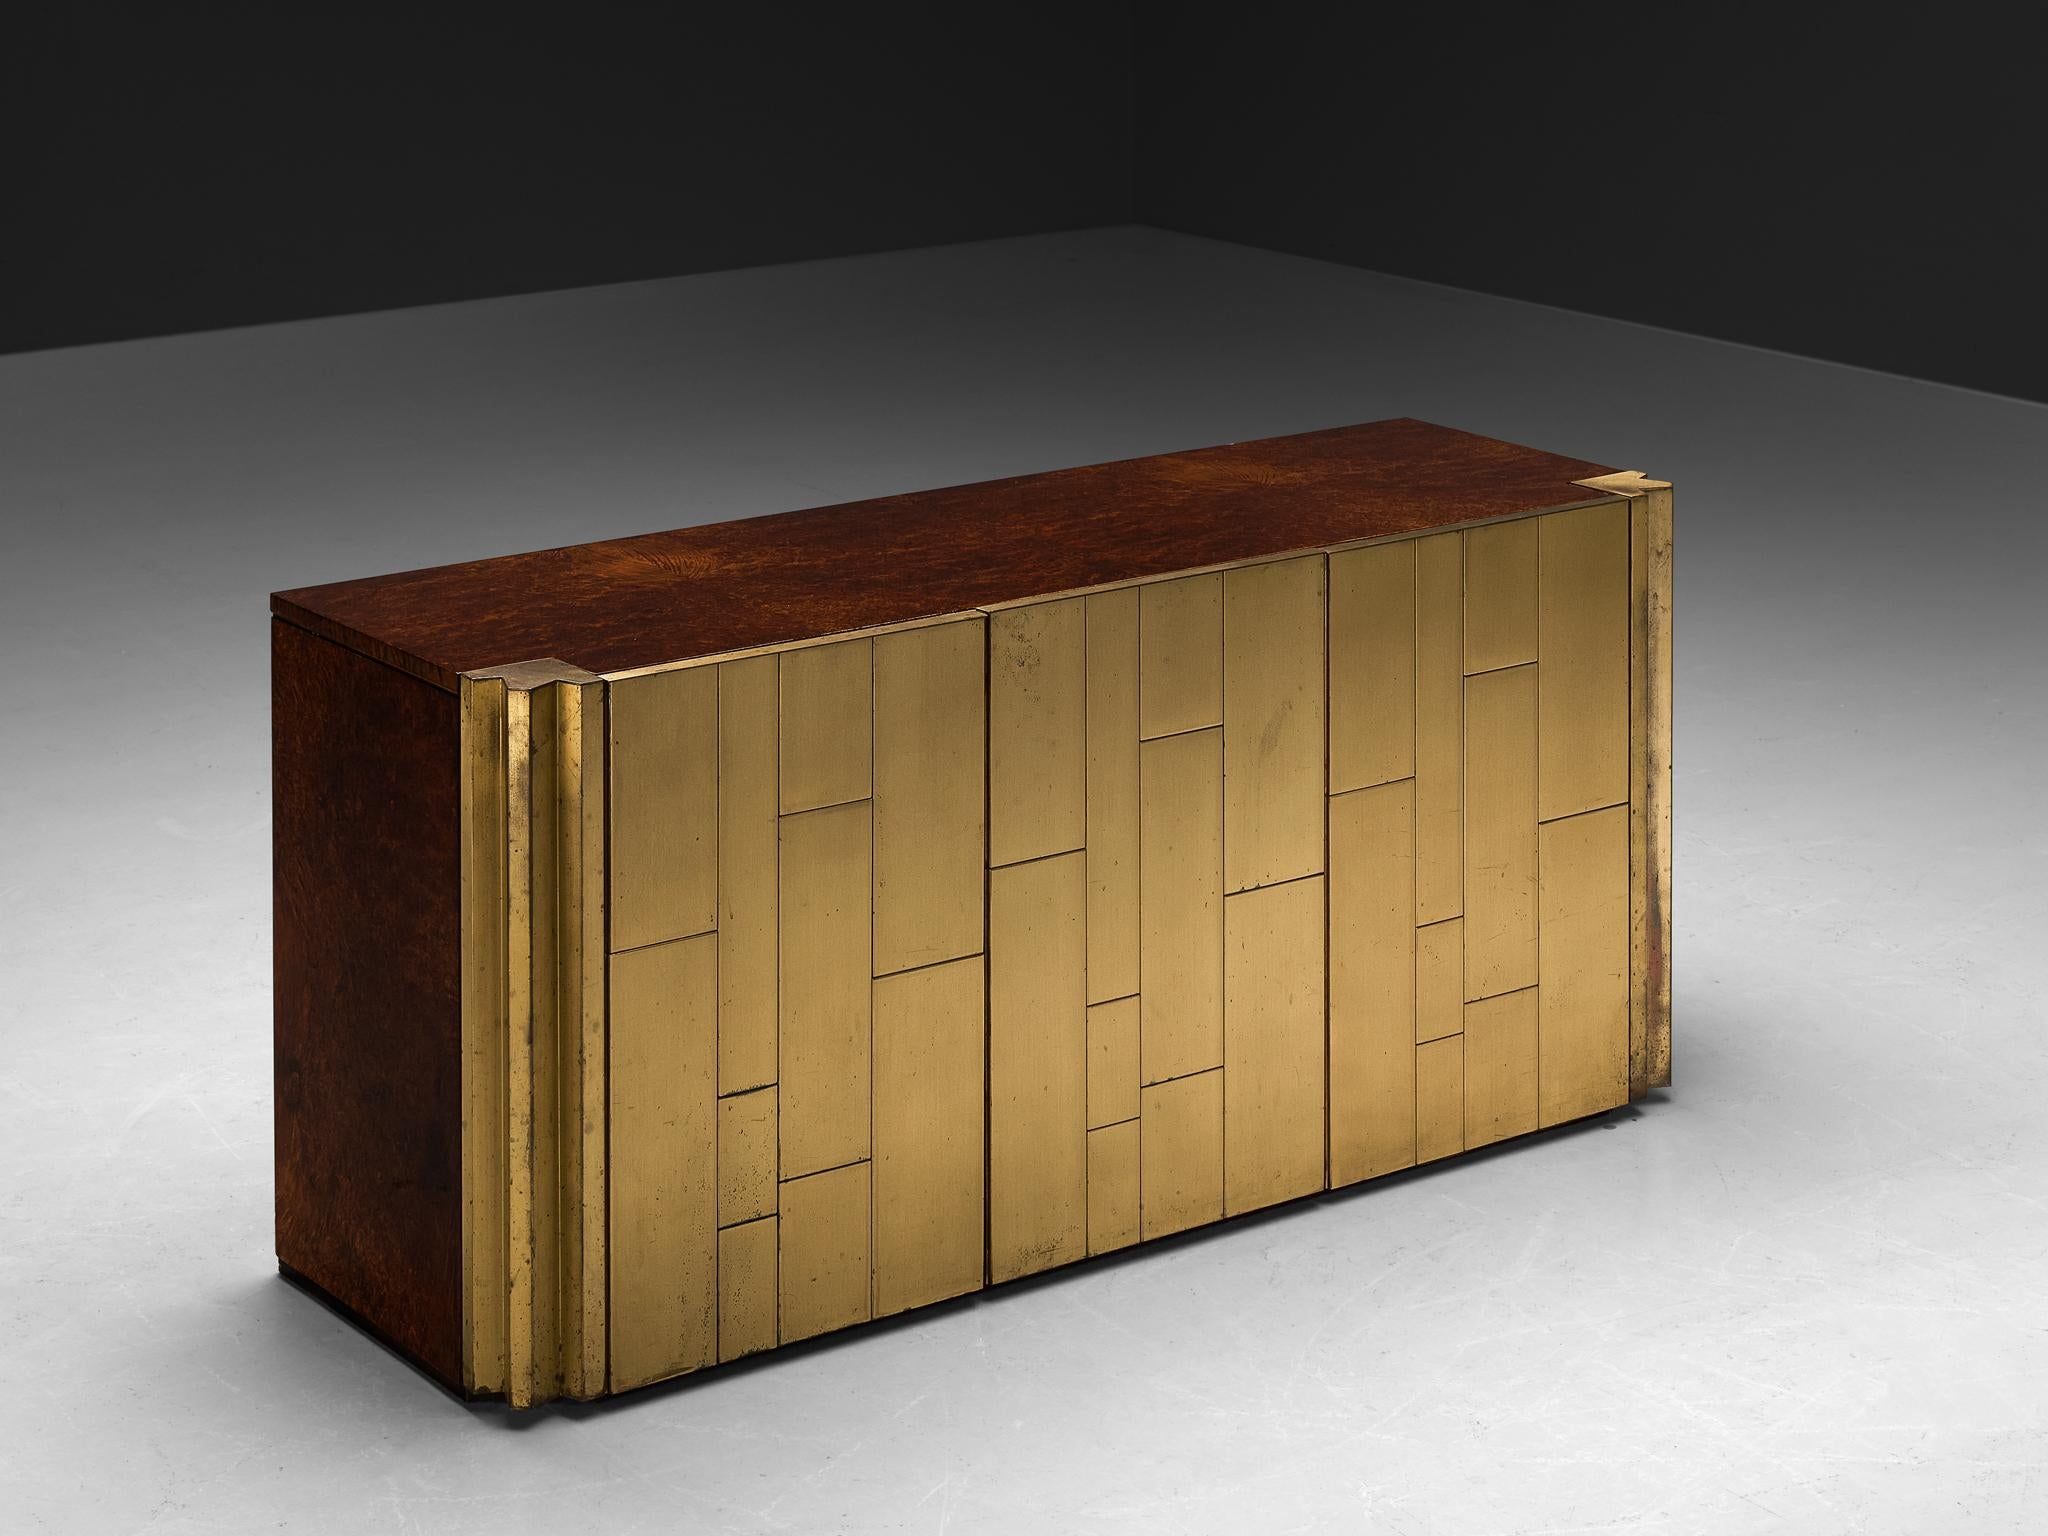 Luciano Frigerio for Frigerio di Desio, sideboard, brass, walnut wood, Italy, 1970s

This exquisite sideboard, masterfully crafted by the imaginative Italian designer Luciano Frigerio, beautifully captures the aesthetic nuances of the 1970s era. The